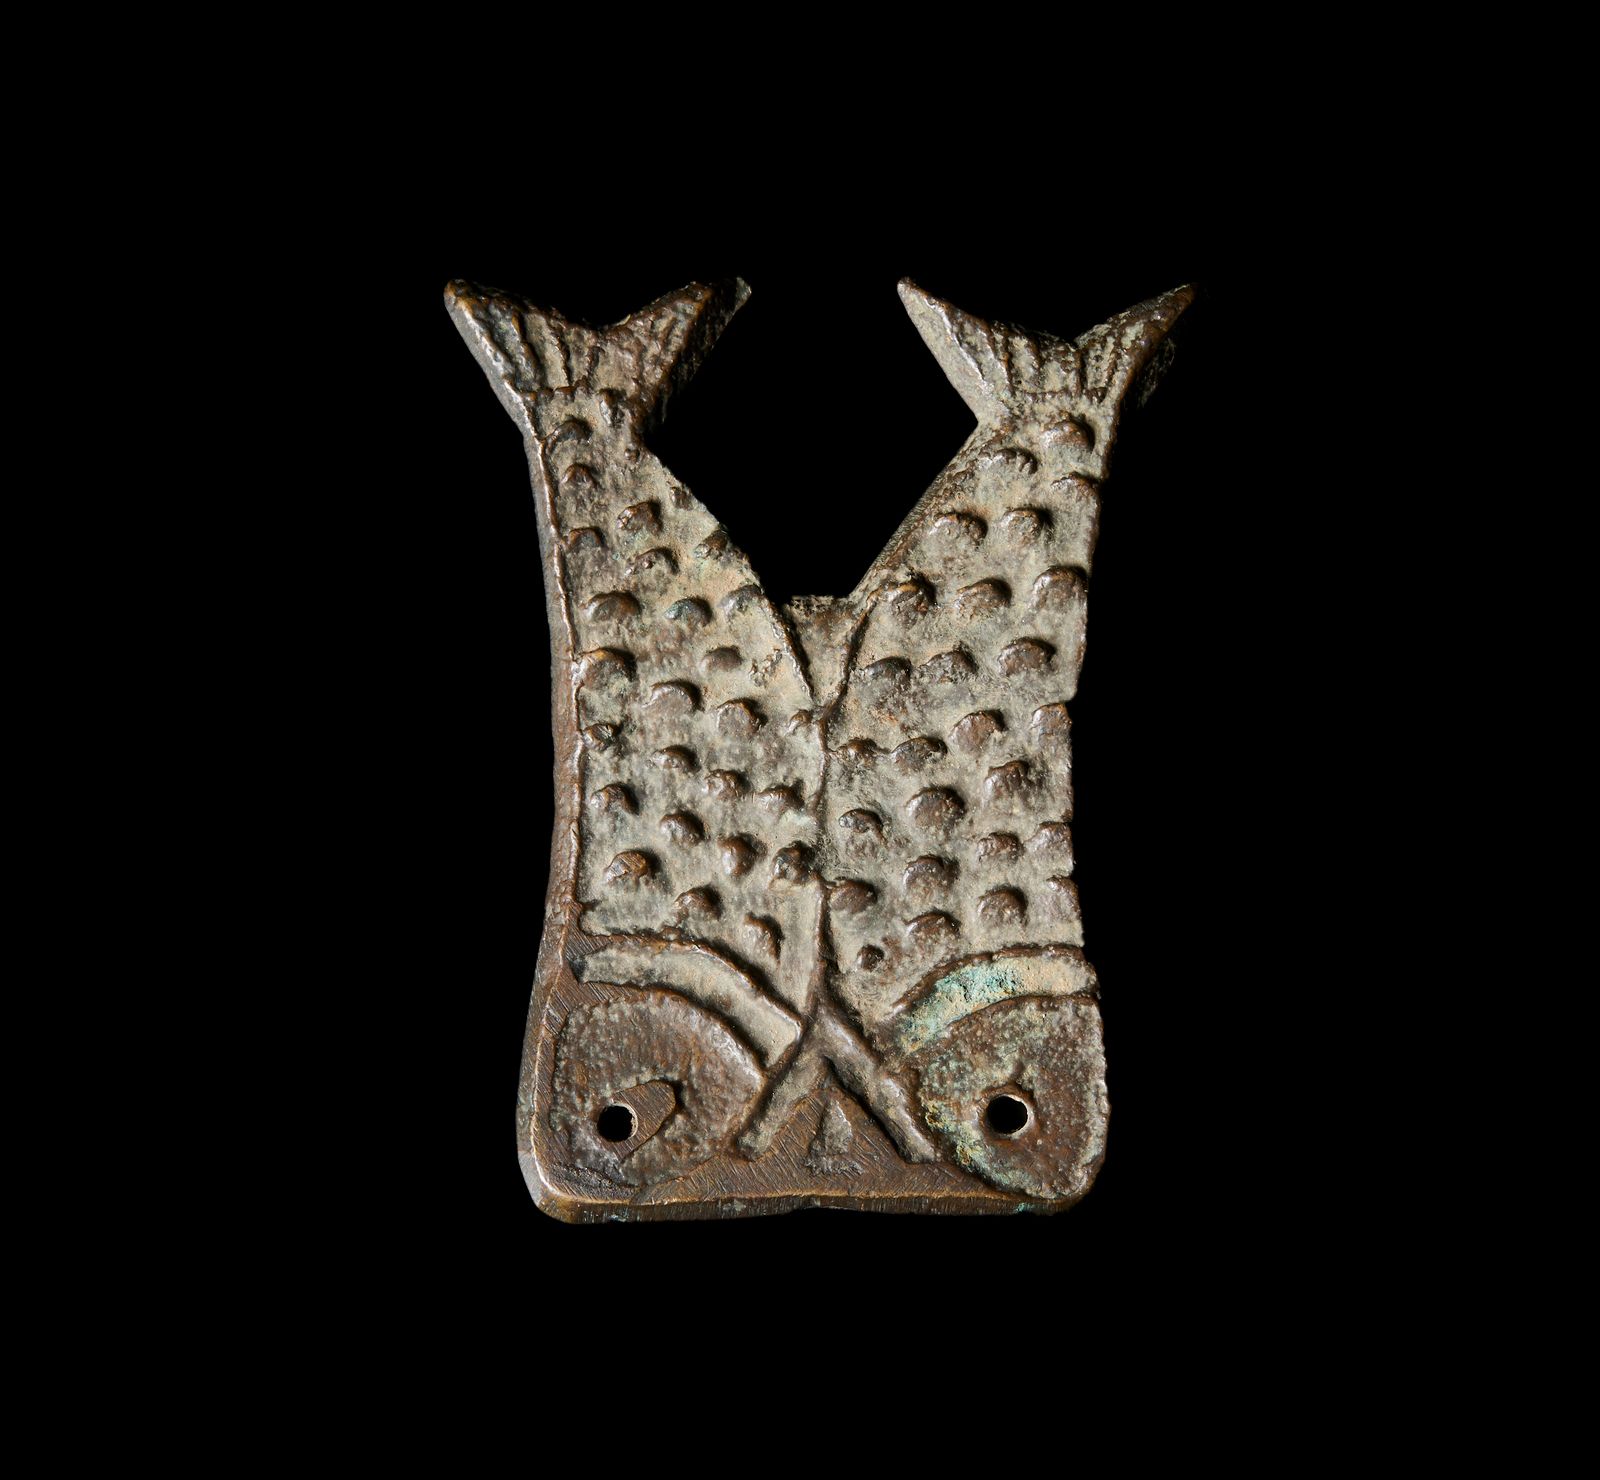 Chinese Art A bronze pendant depicting two fishes Arte chino. Colgante de bronce&hellip;